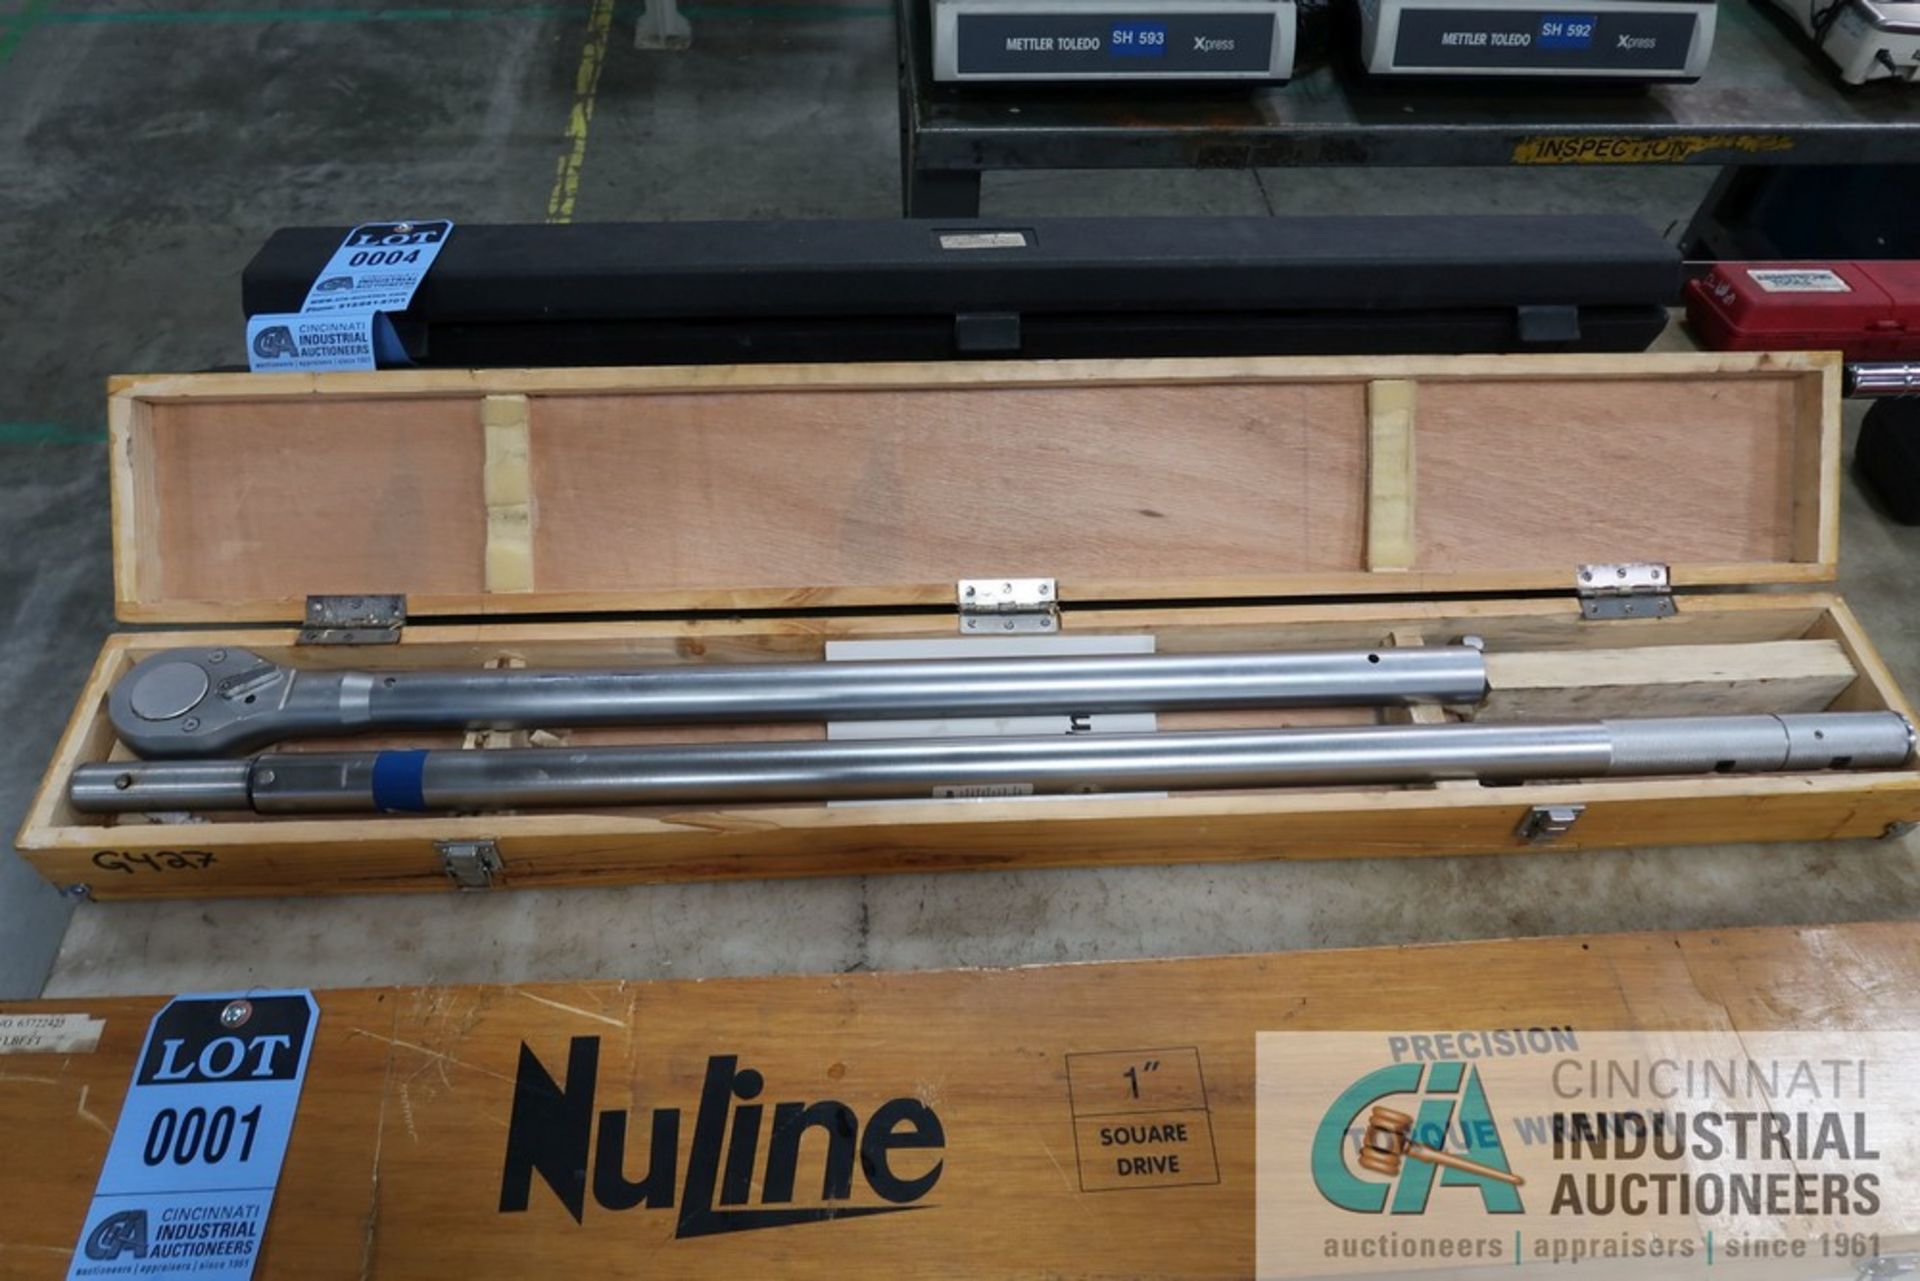 500-1500 LBF/FT NULINE 1" DRIVE TORQUE WRENCH